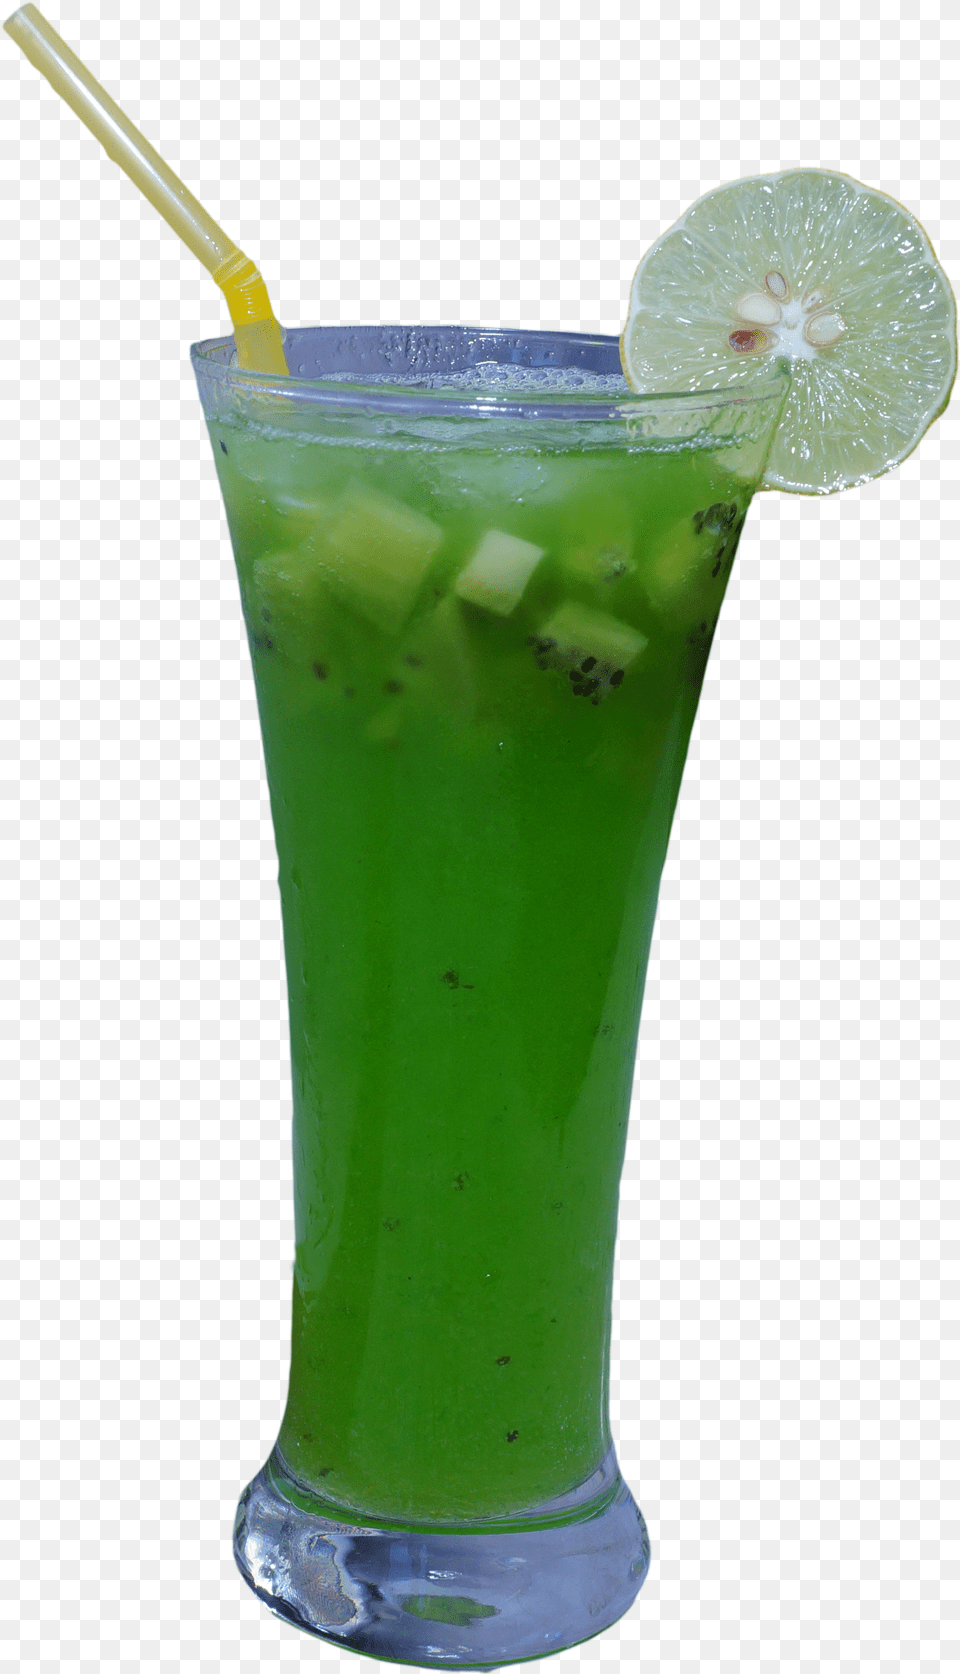 Kiwi Fruit And Mint Water Glass, Alcohol, Beverage, Cocktail, Juice Png